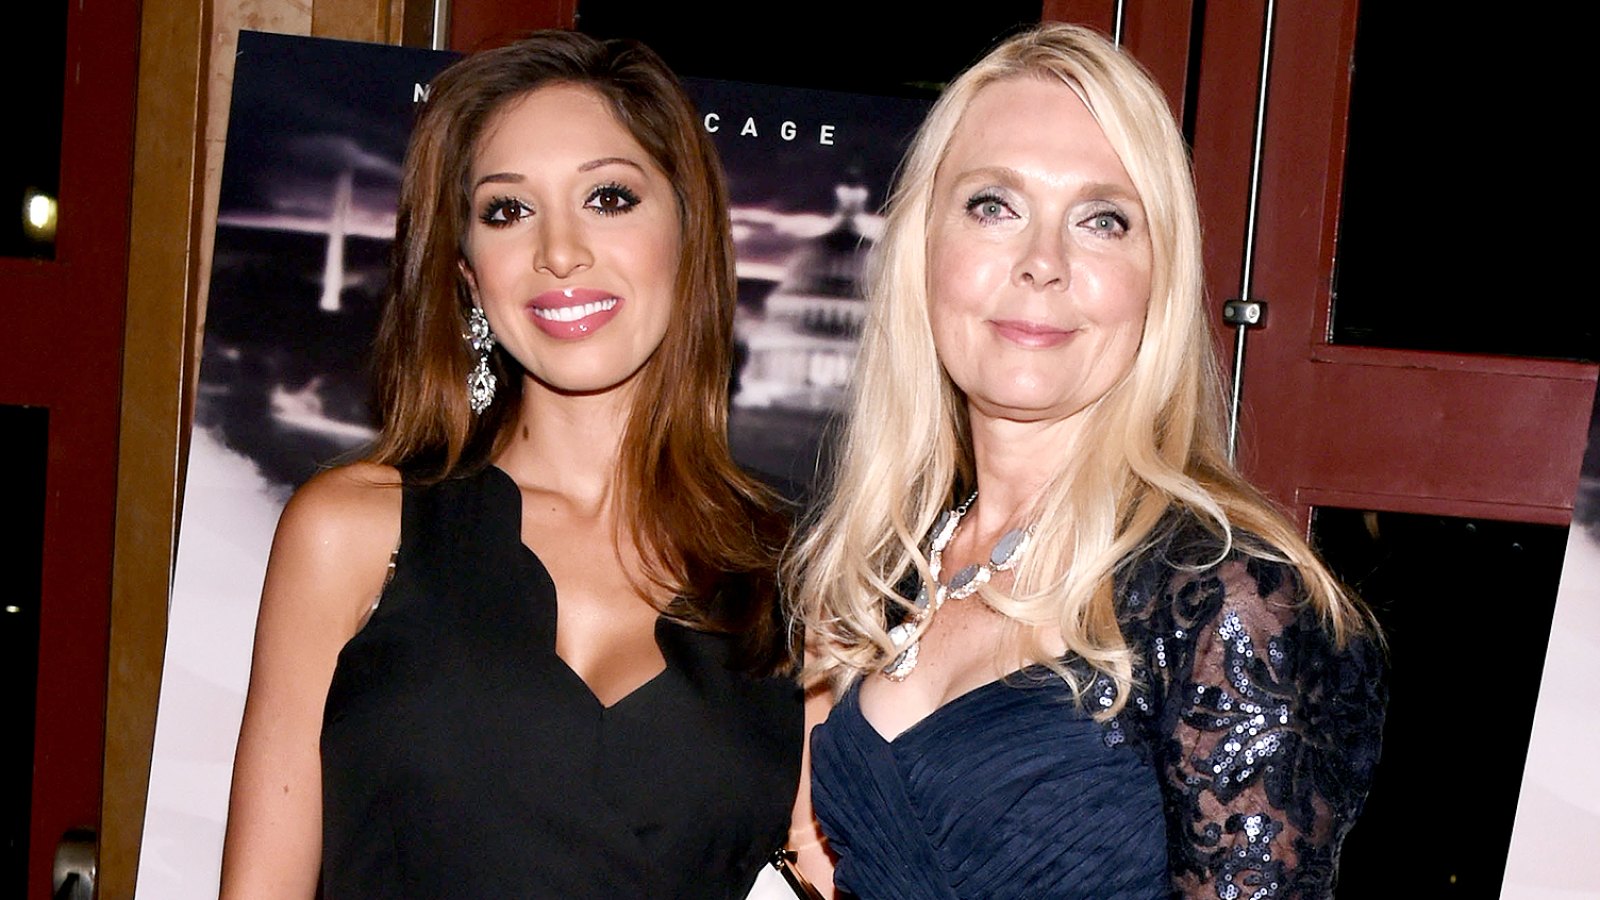 Farrah Abraham and Debra Danielsen attends "The Runner" New York Special Screening at Village East Cinema on August 6, 2015 in New York City.